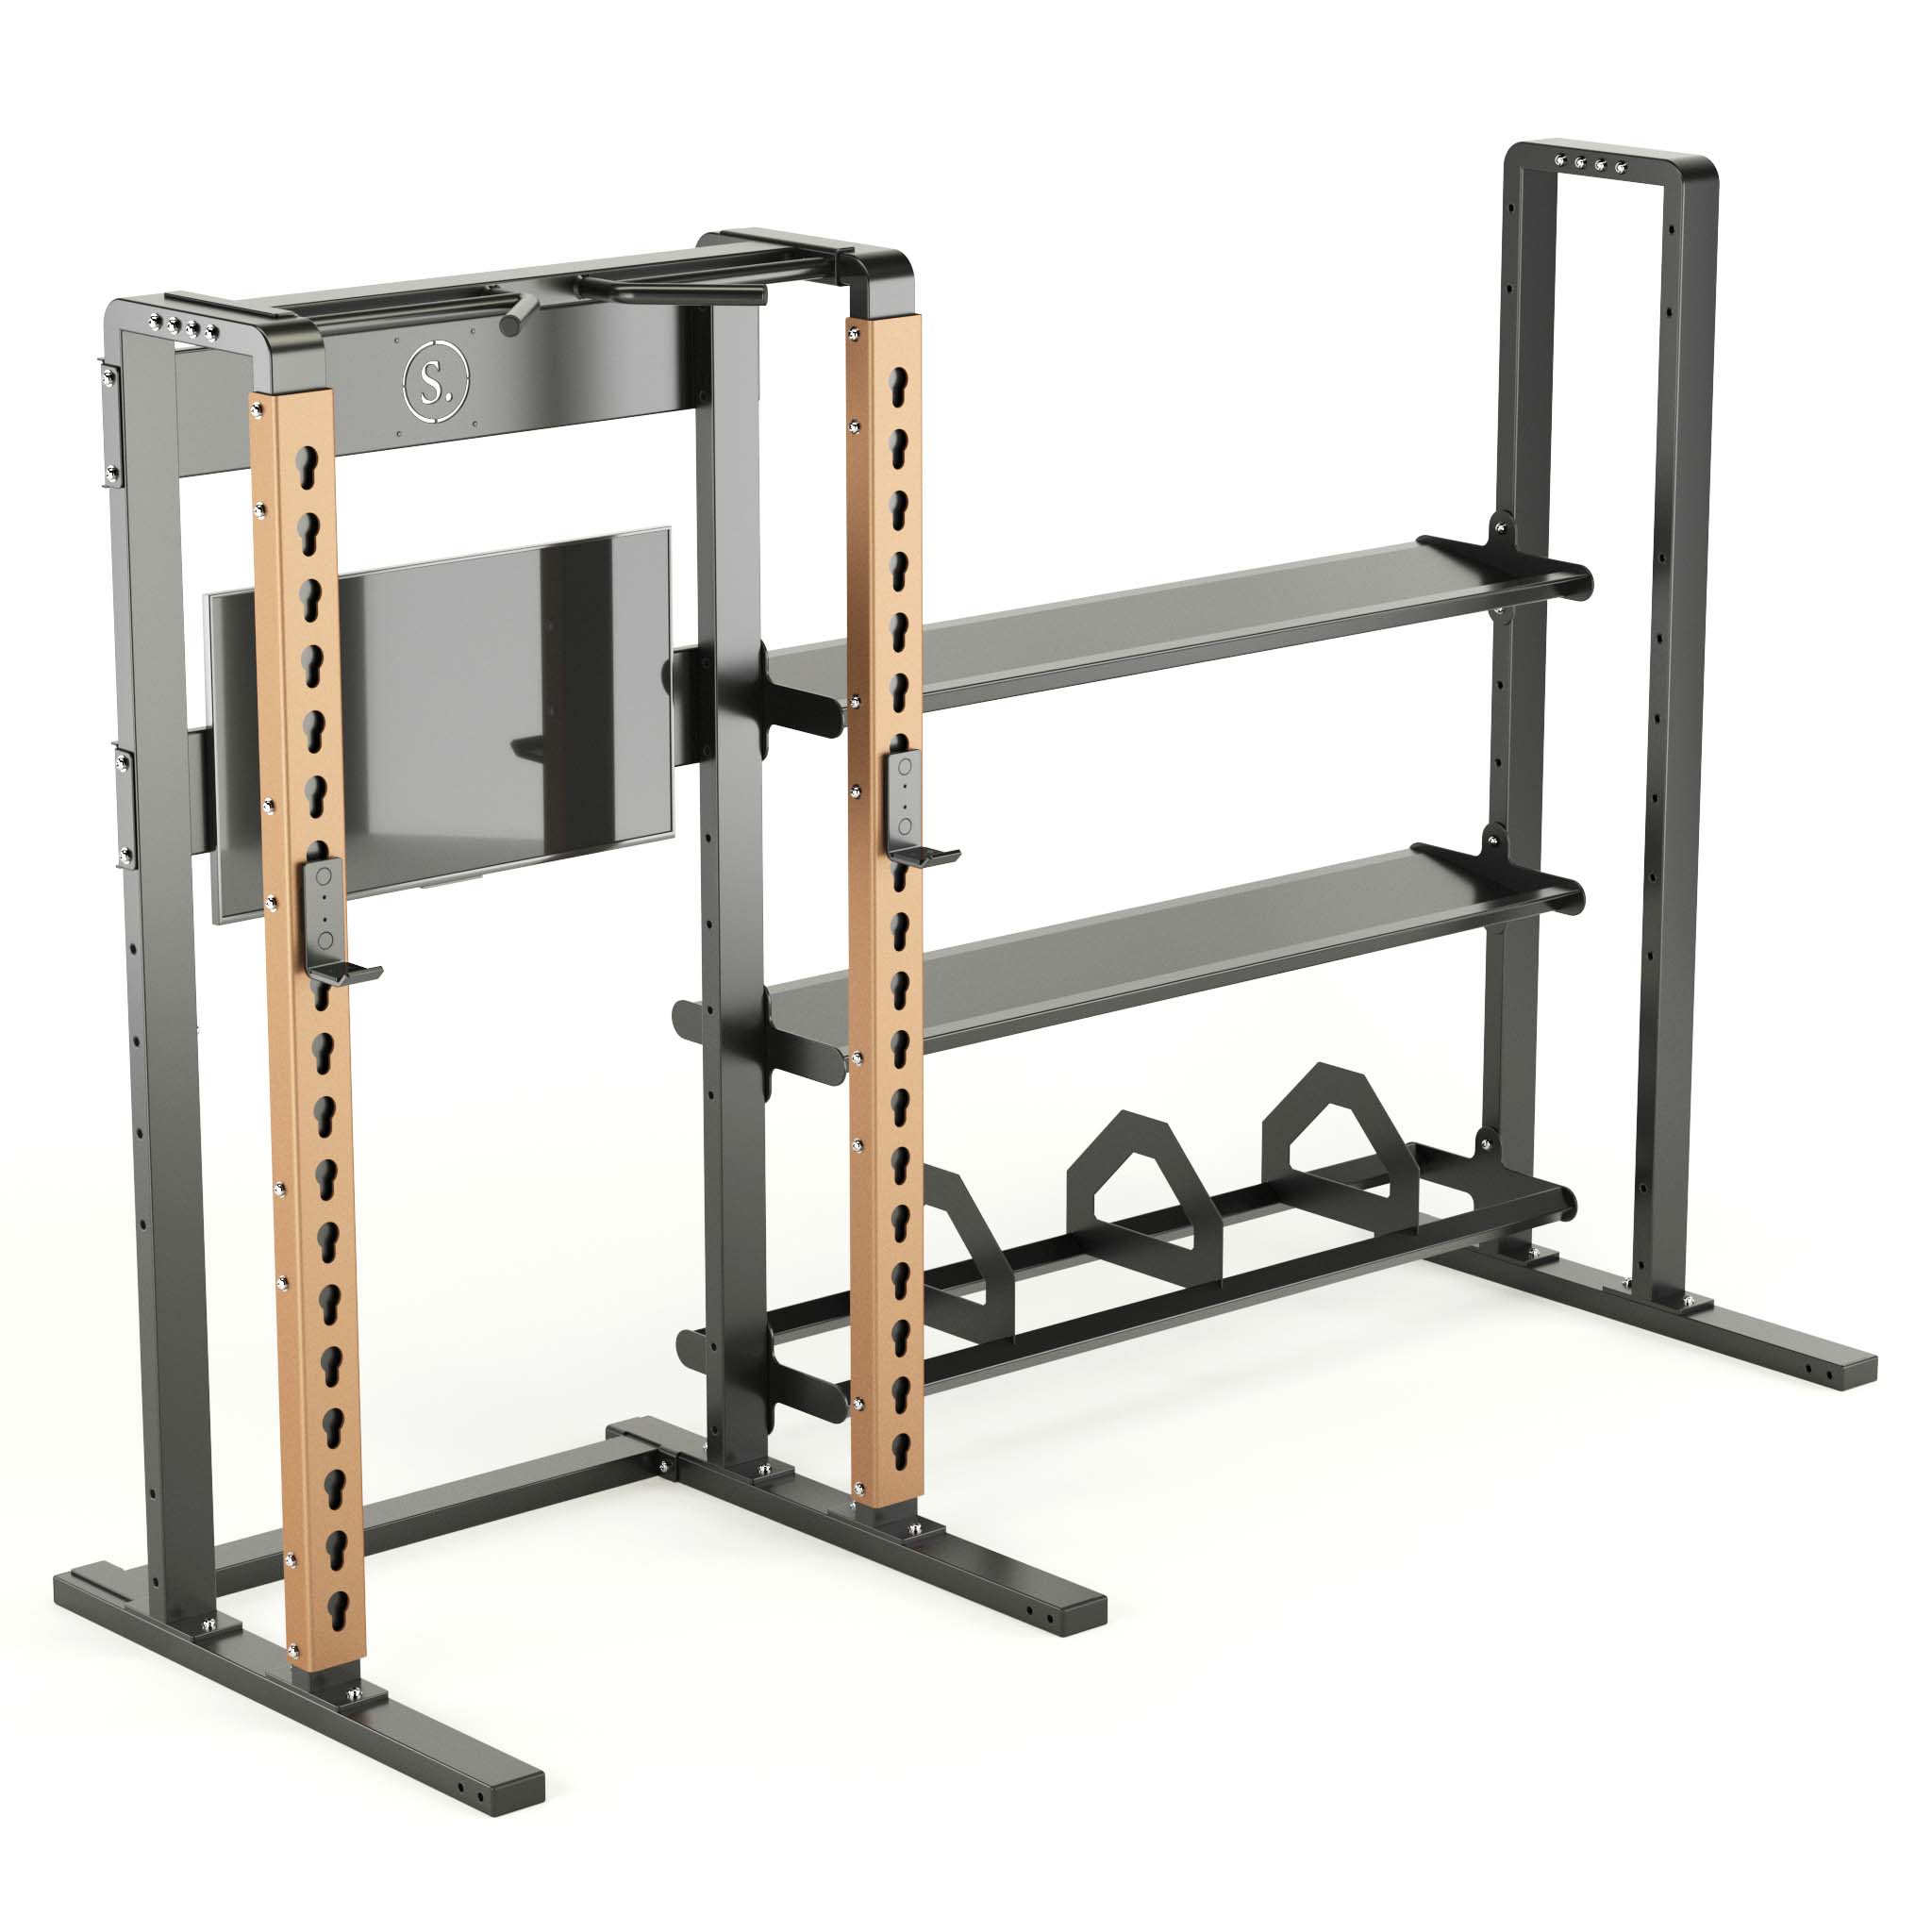 Solo Half Rack Plus with wide storage in bronze